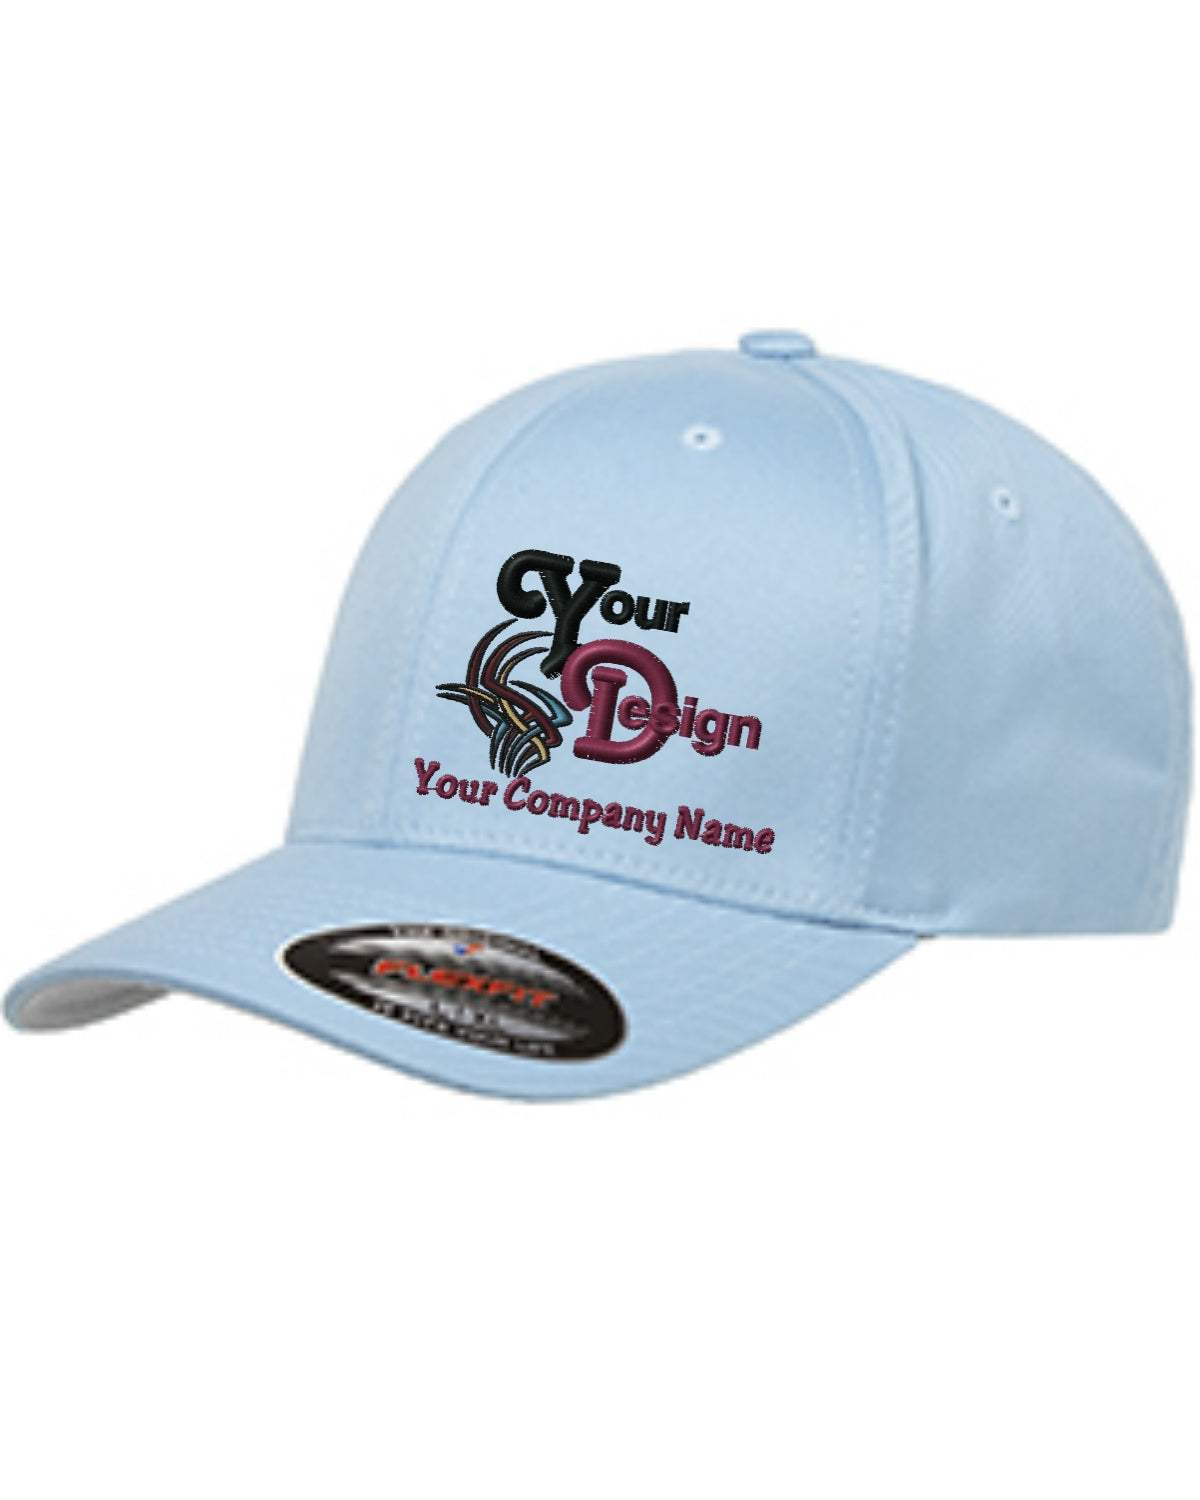 Flex Fitted Ball Cap with Your Company Logo Embroidered sky blue